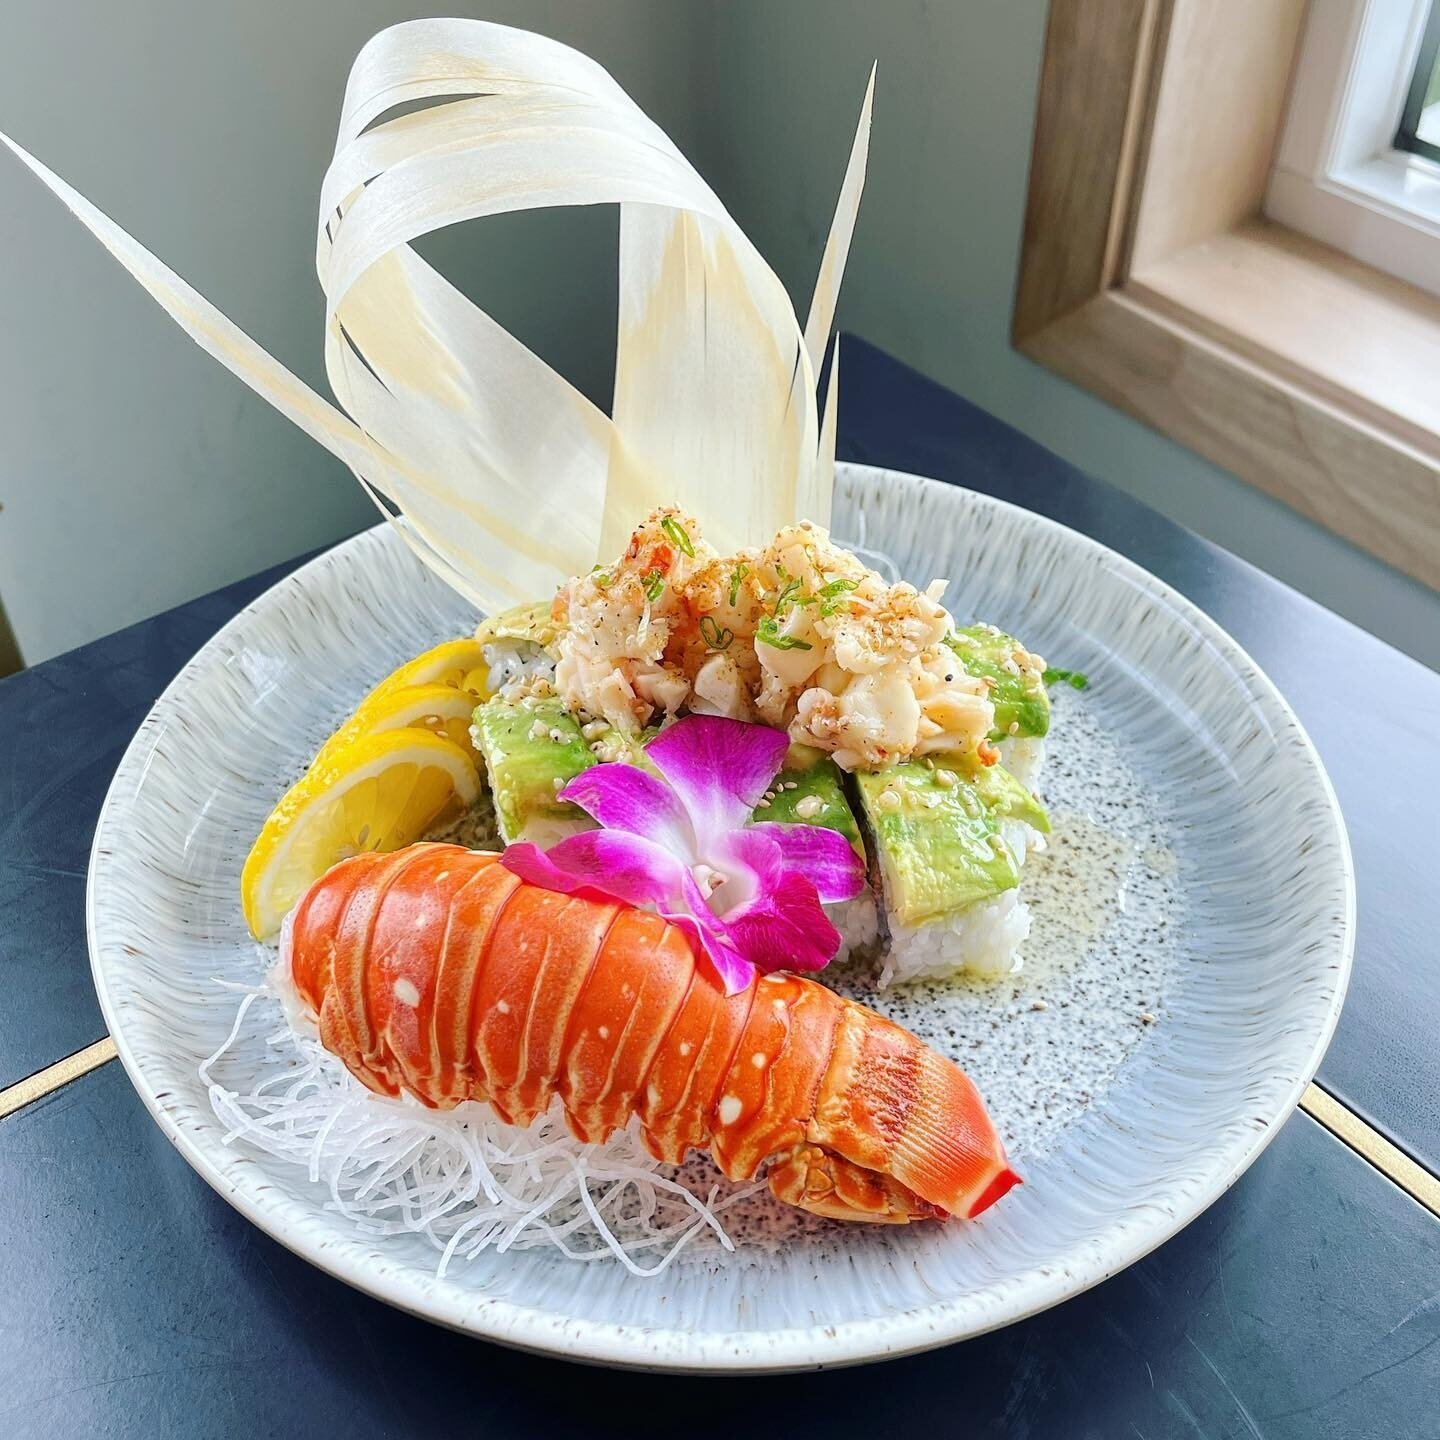 &quot;Best new SUSHI spot in Carlsbad: Sushi Taisho 🤗&quot; 📷: Boston Lobster Roll 🍣🥢⁠
⁠
Thanks for your kind words @sdfoodiegram! 🤍